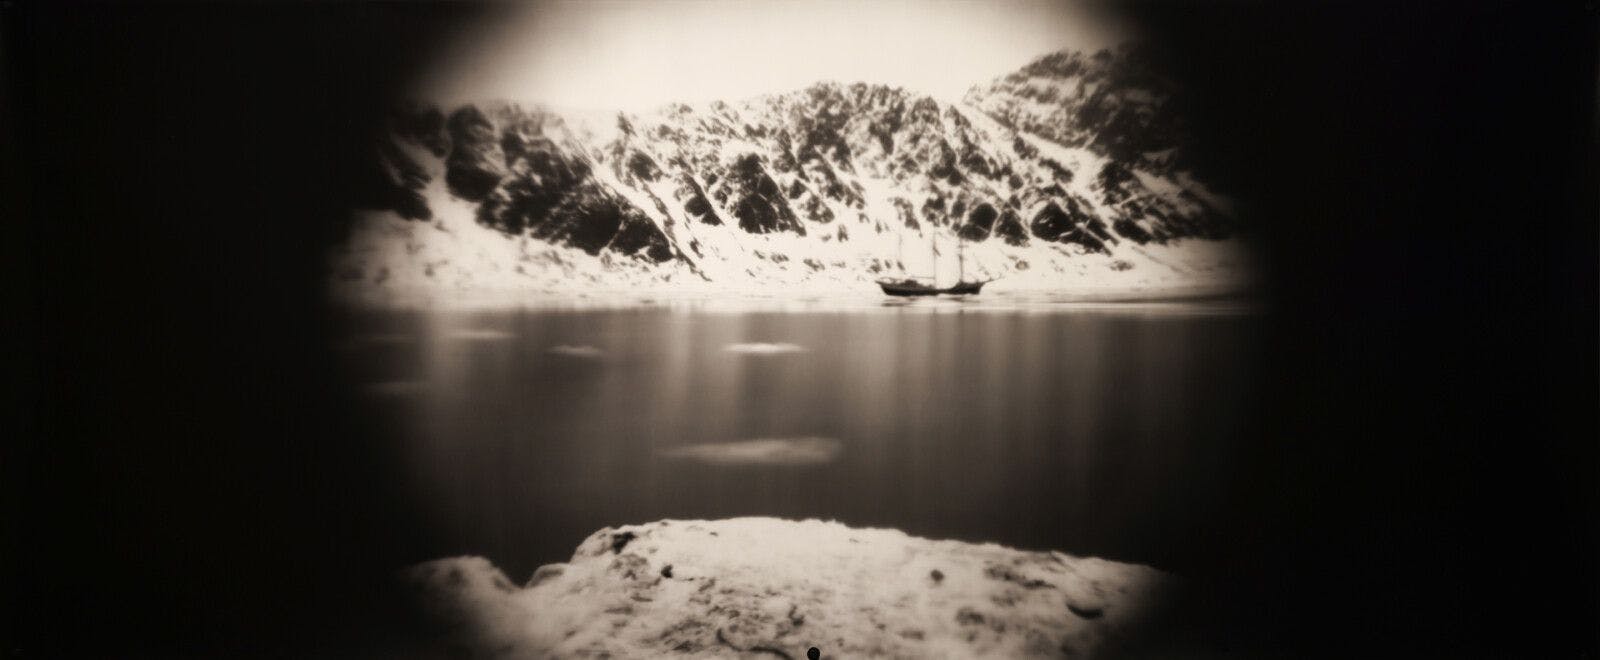 Tristan Duke, Antigua at Fjortende Julibukta, 2022, Gelatin Silver Photograph, made using Glacial Camera with a lens made from glacier ice.